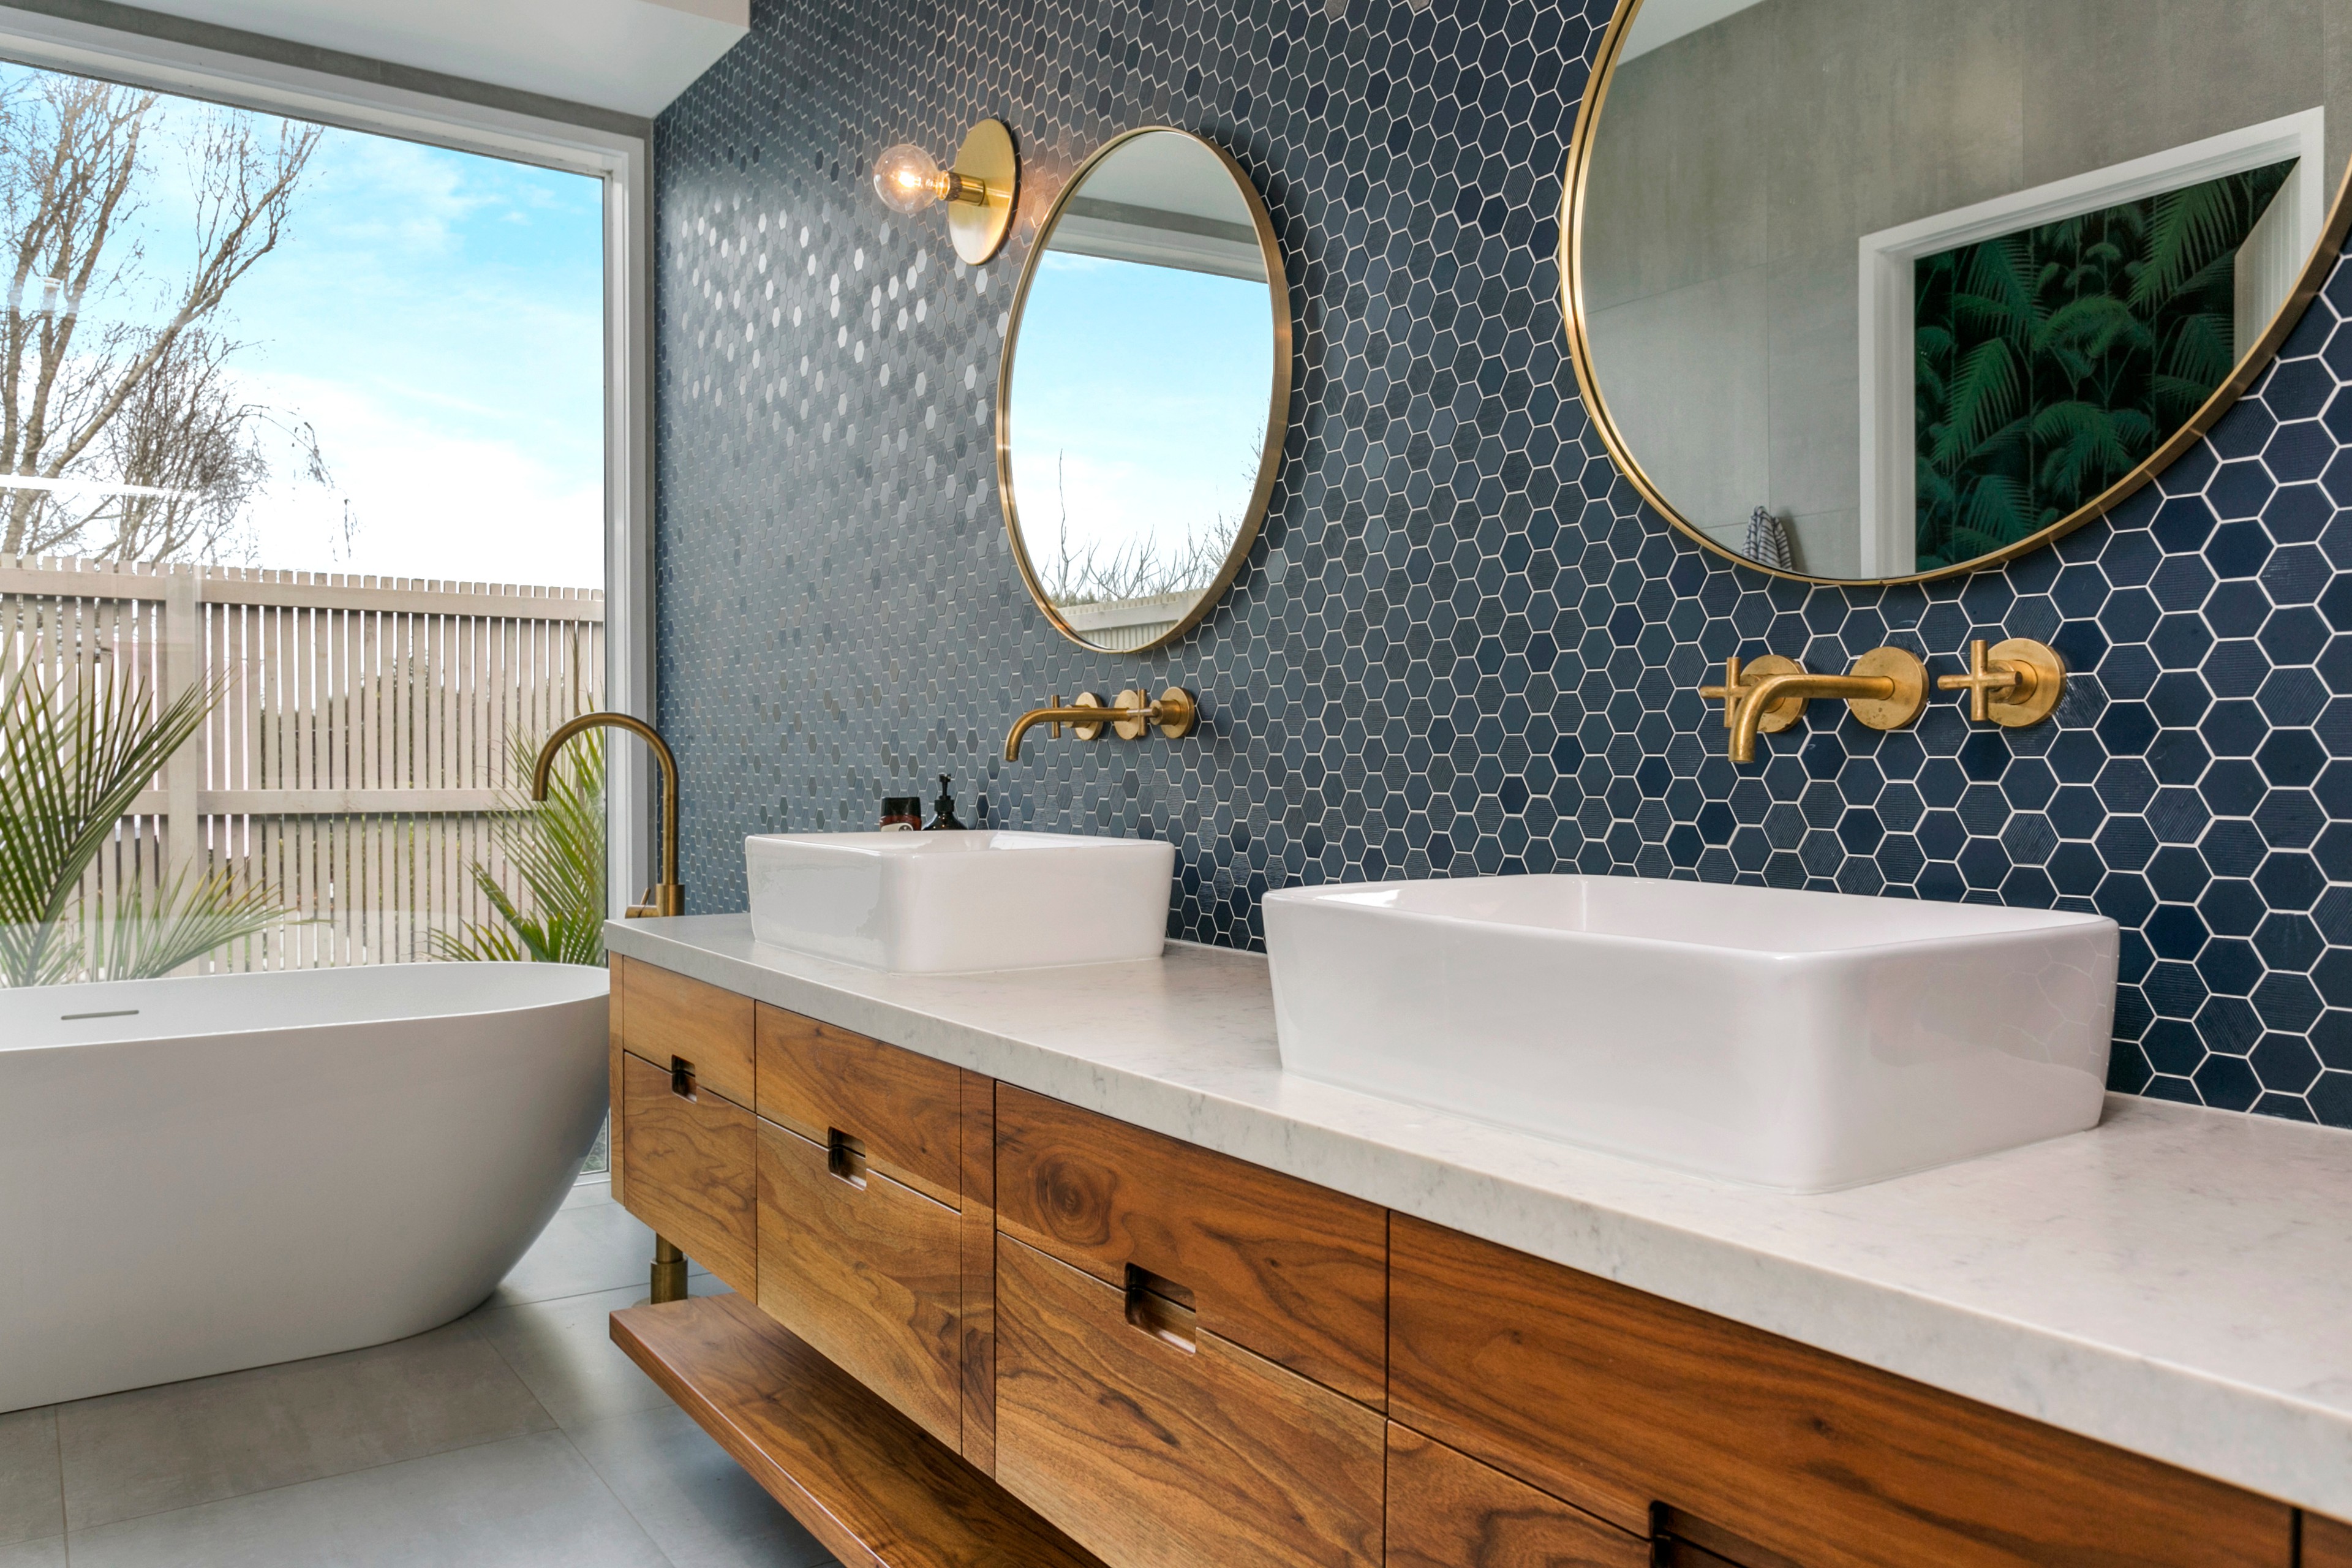 75 Beautiful Bathroom With Brown Cabinets And Blue Walls Pictures Ideas April 2021 Houzz